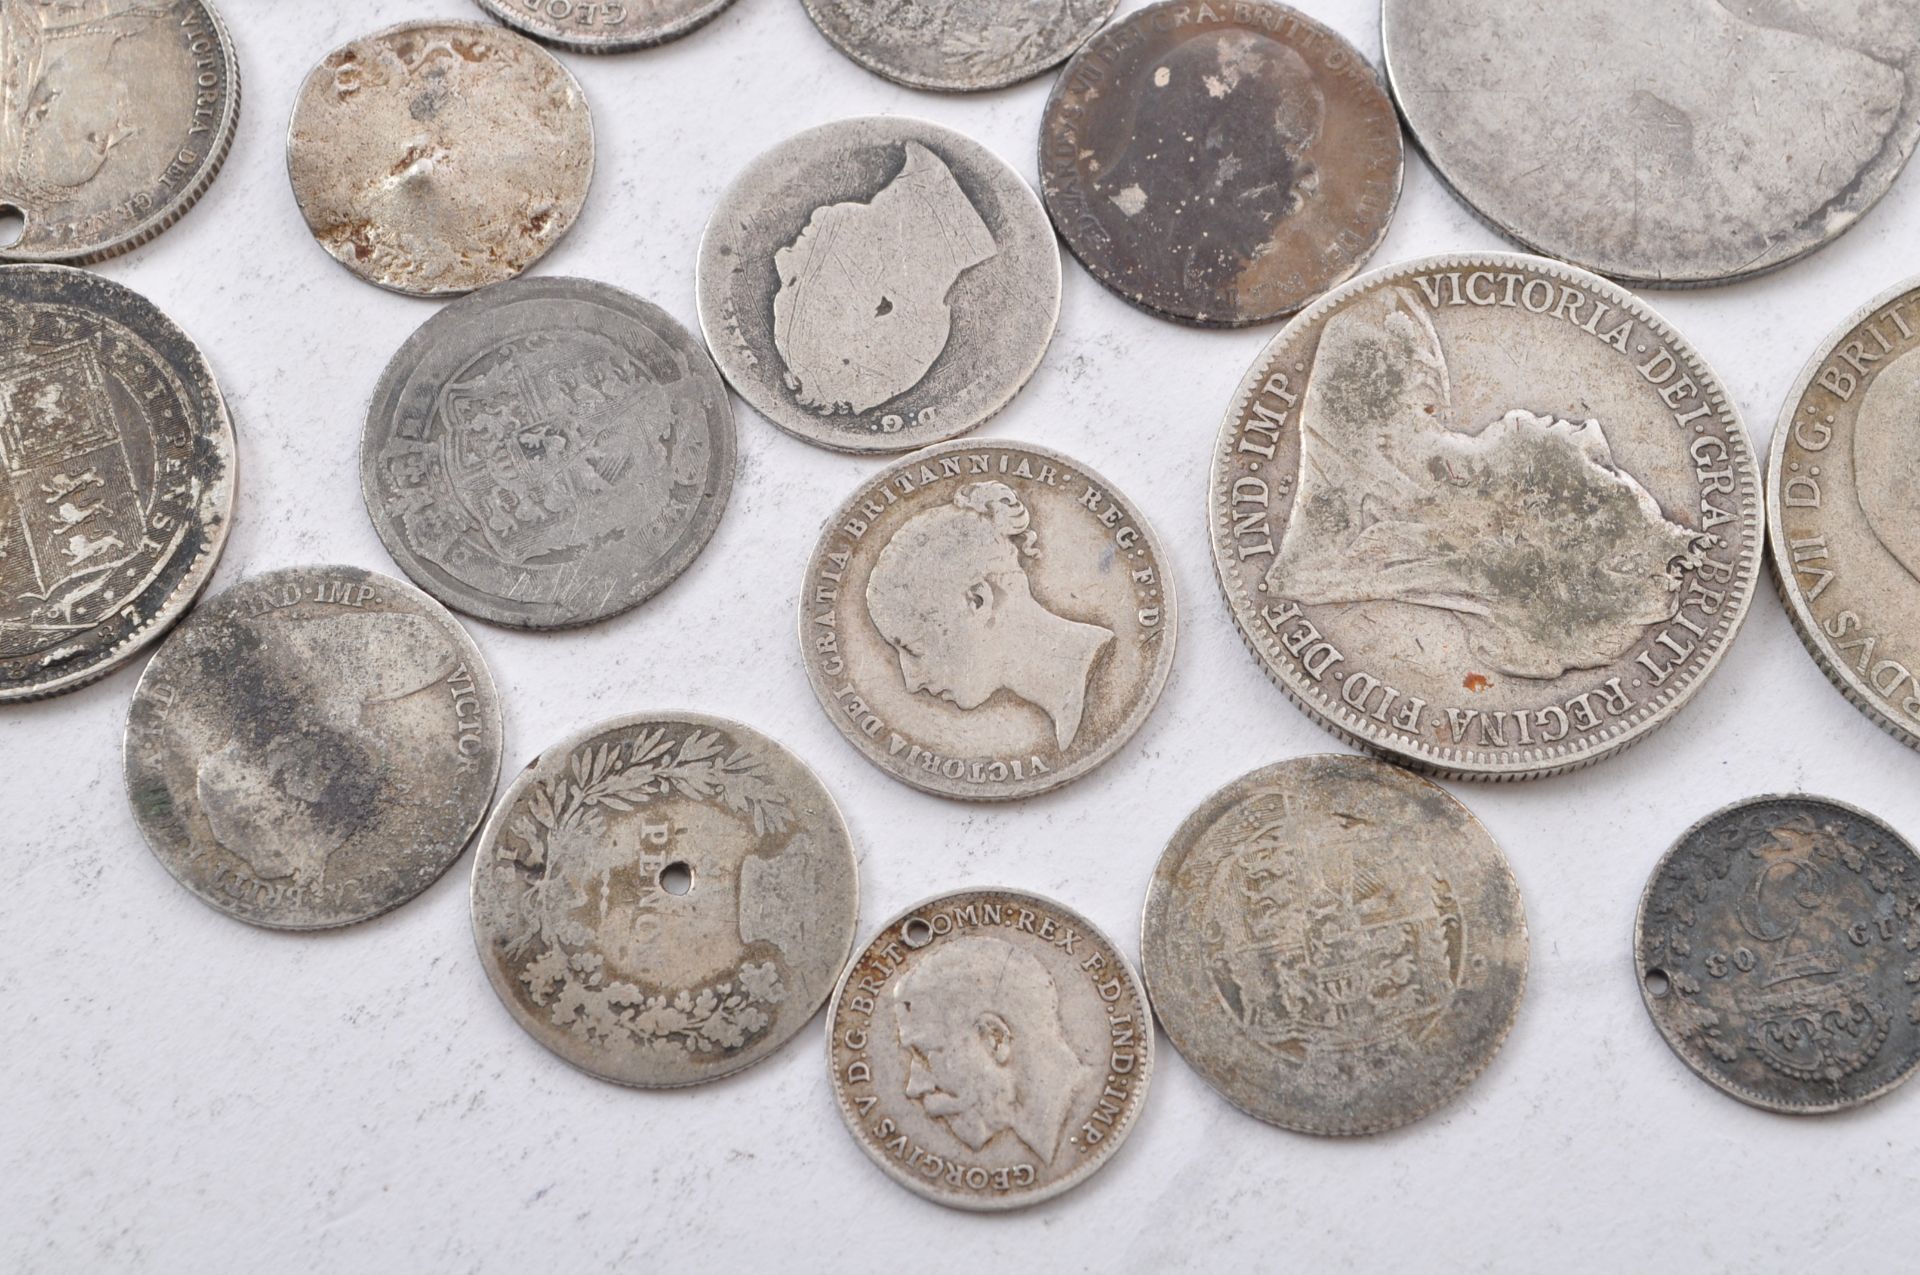 PRE 1920 UNITED KINGDOM SILVER SIXPENCE AND FLORINS - Image 3 of 9